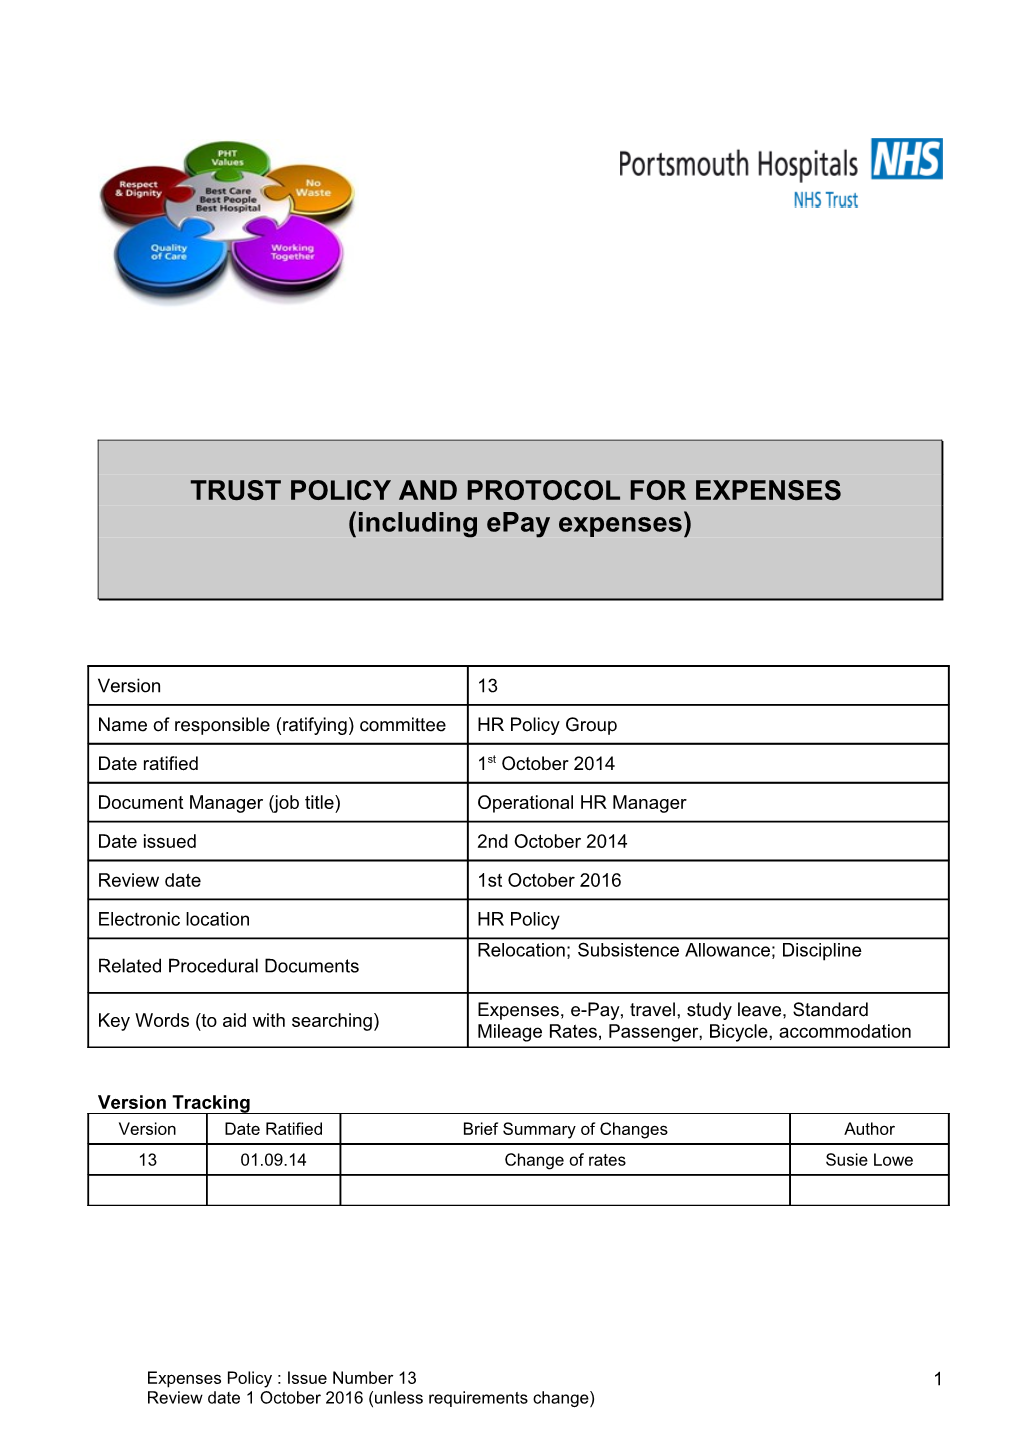 Trust Policy and Protocol for Expenses